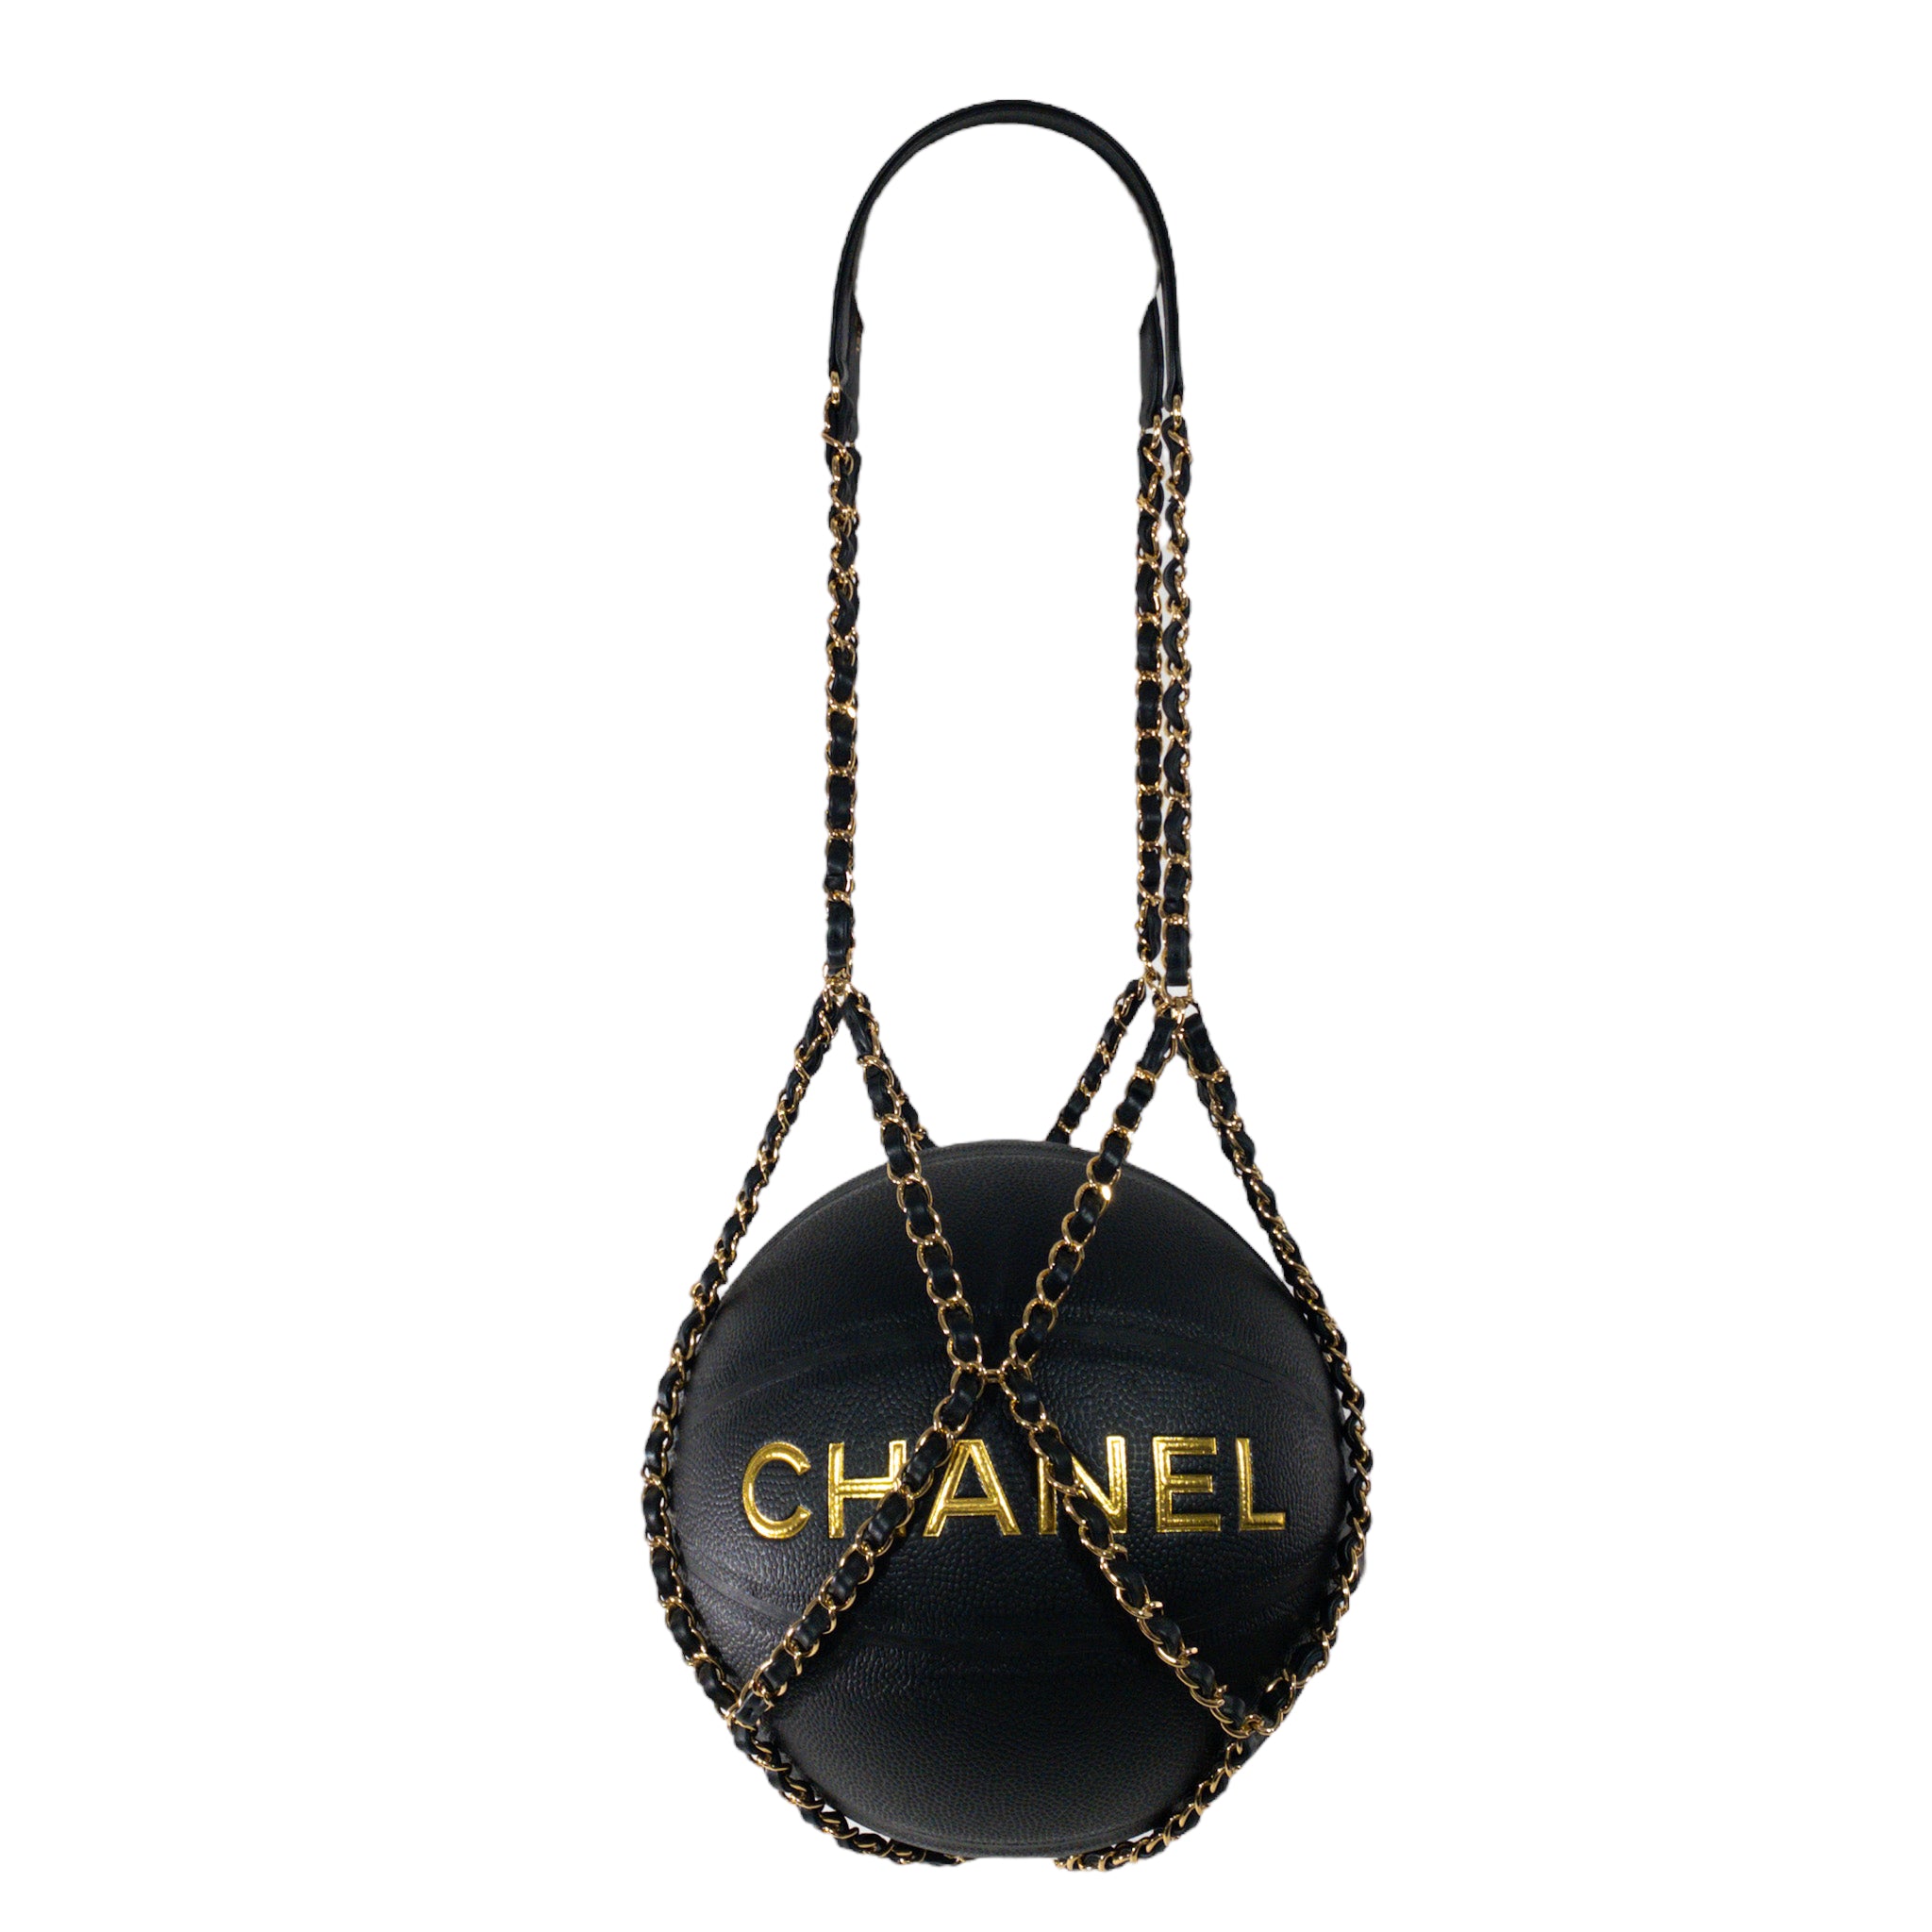 Chanel 2019 Limited Edition Basketball w/ Chain Harness